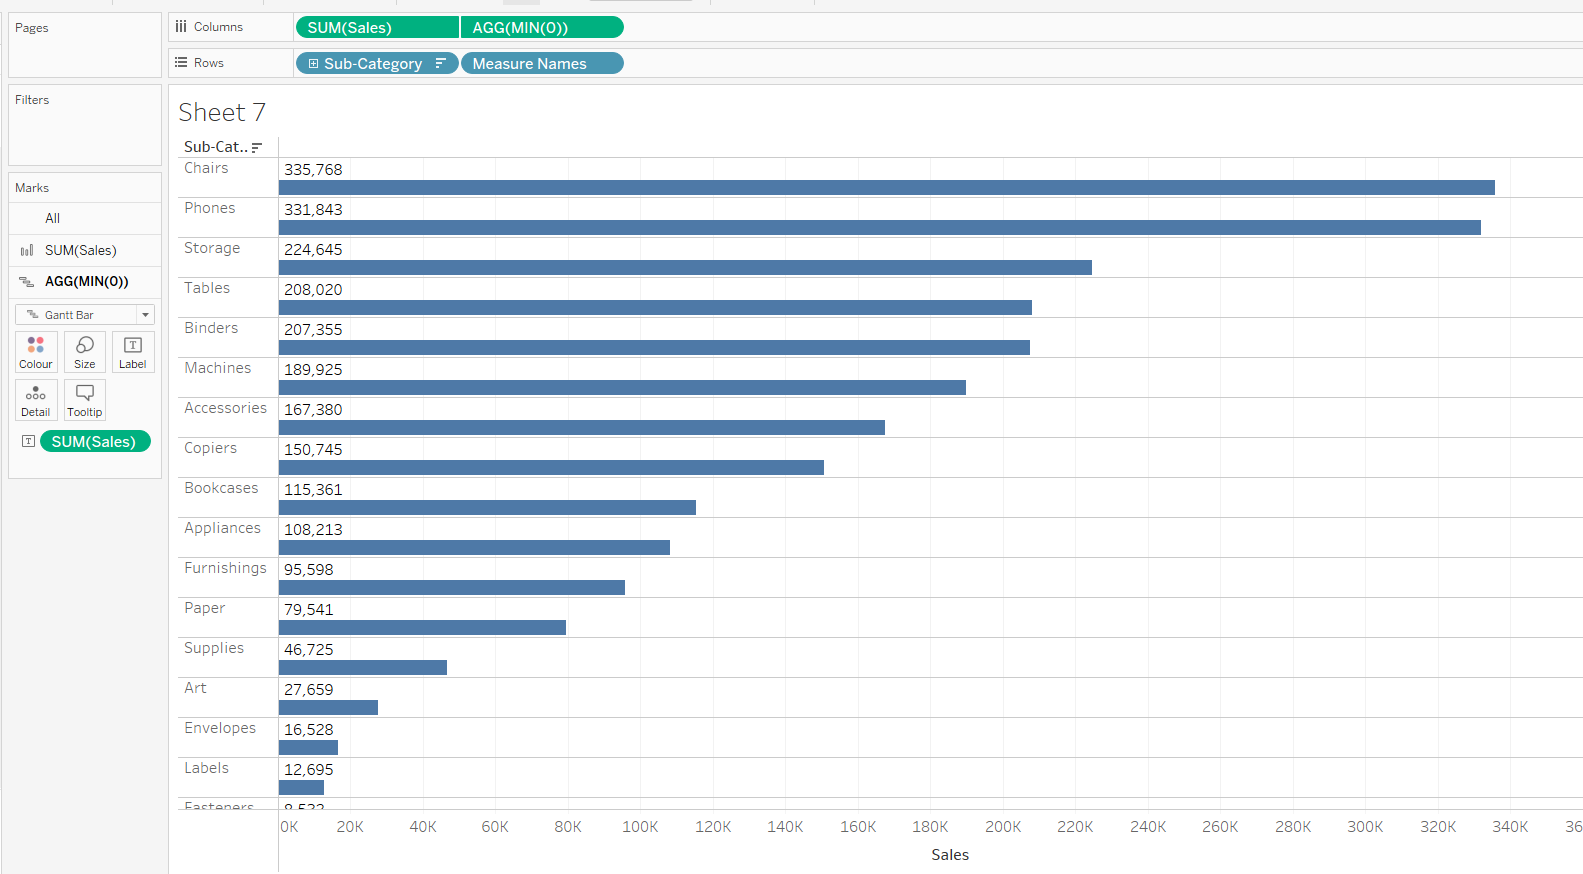 add label to secondary axis of horizontal bar chart in Tableau